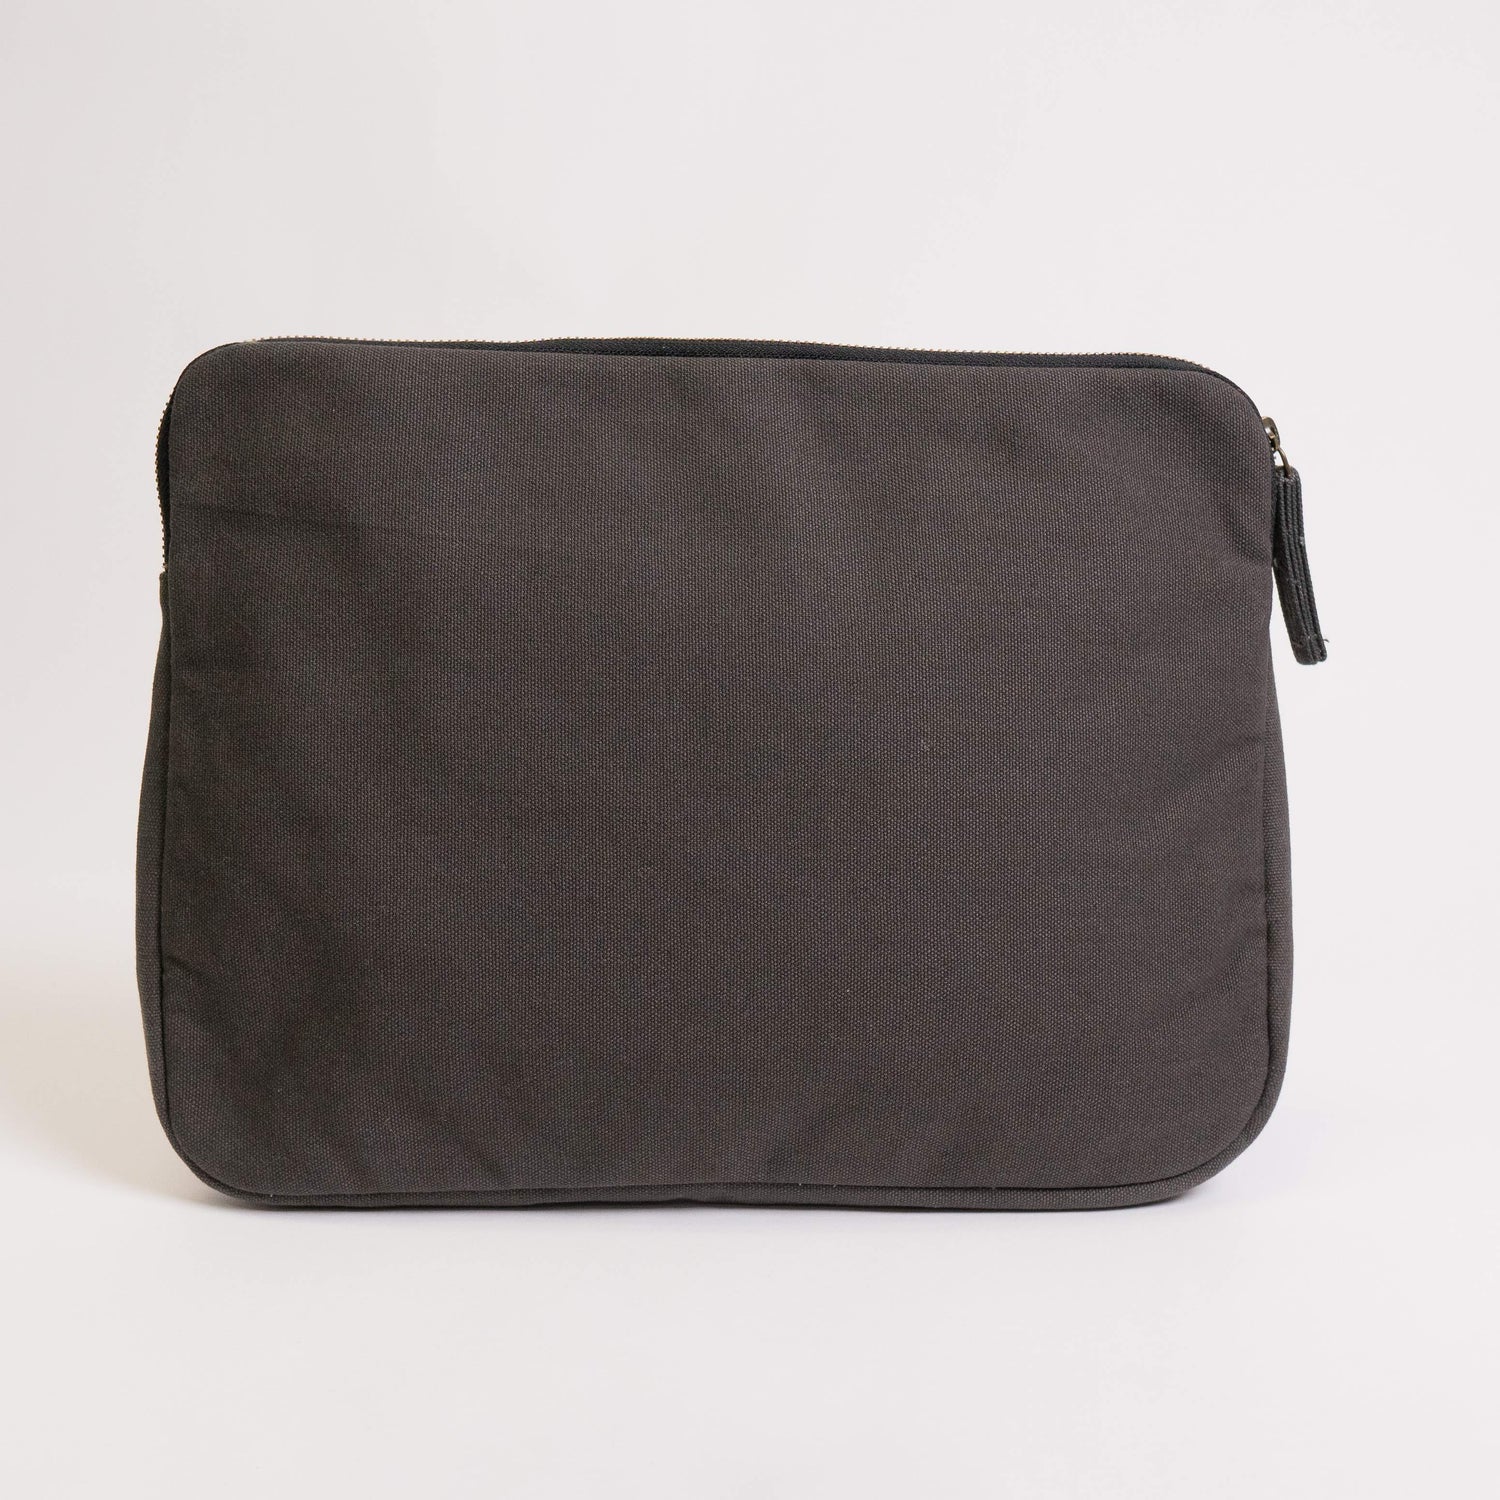 laptop covers 13 inch